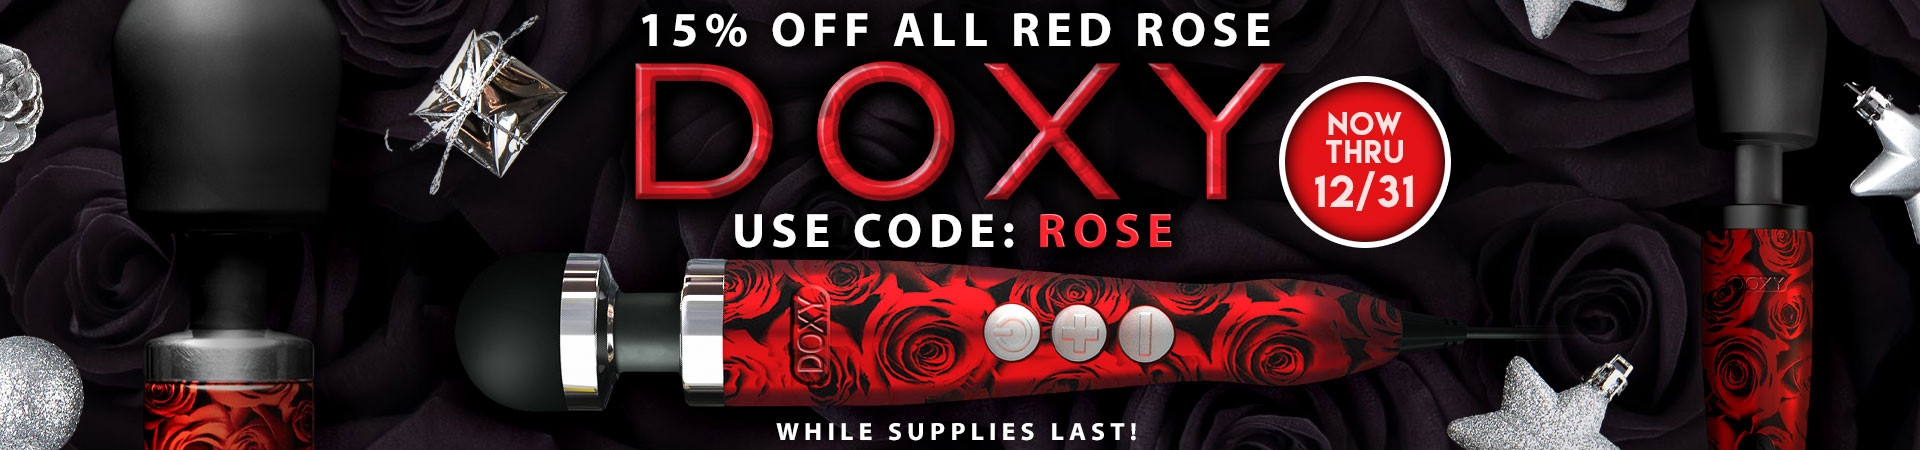 15% Off All Red Rose  - Use Code: ROSE - Now Thru 12/31